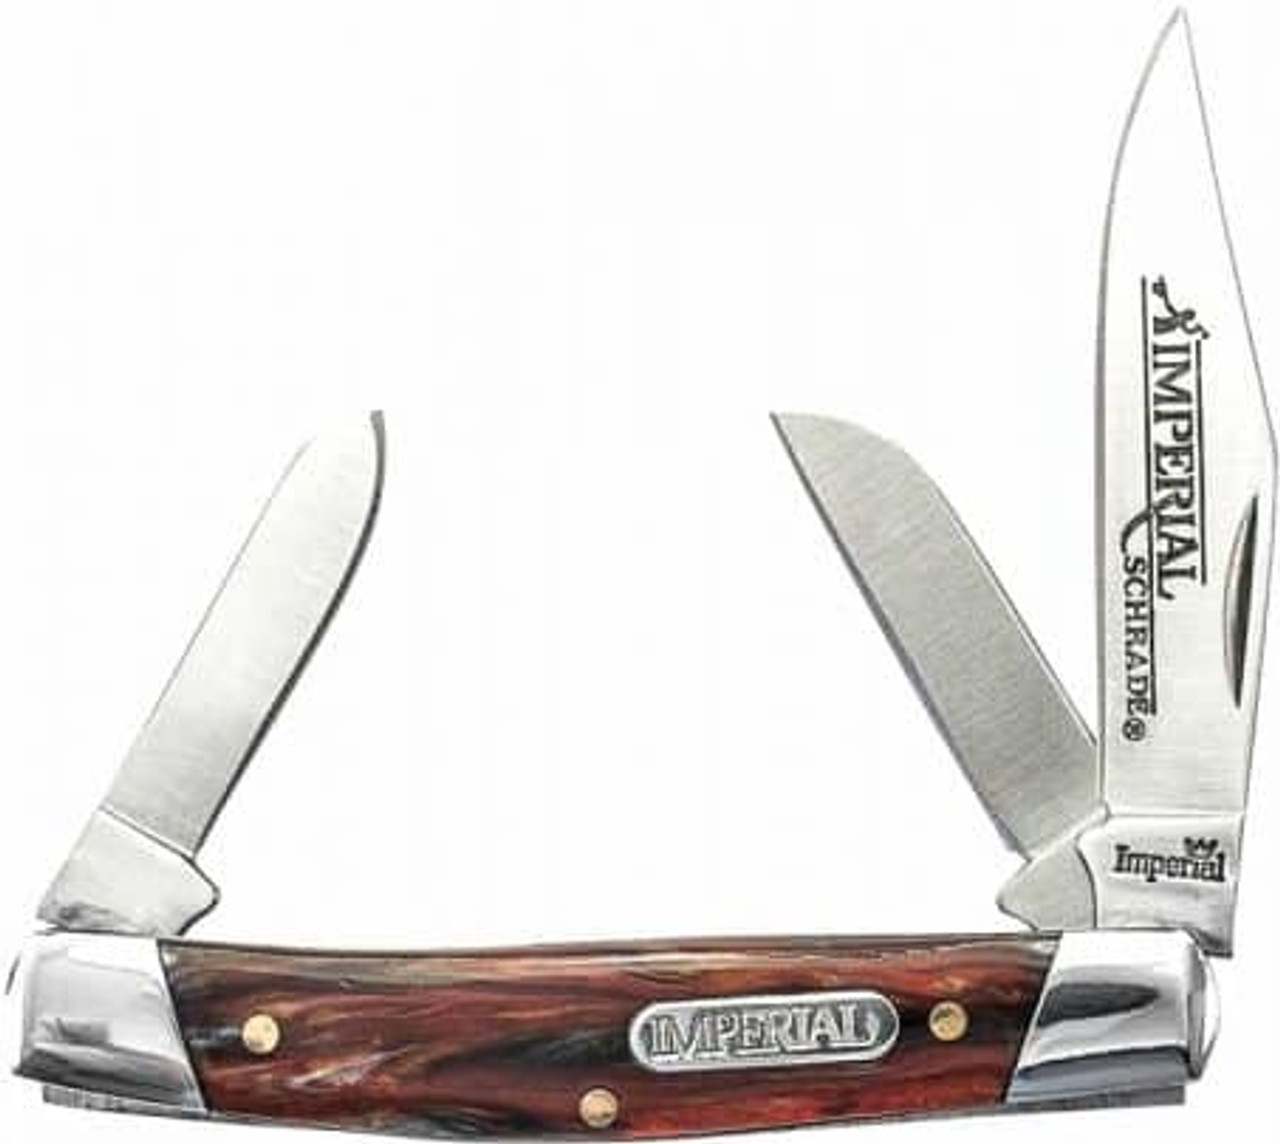 IMPERIAL MED STOCKMAN, BROWN MARBLE HANDLE